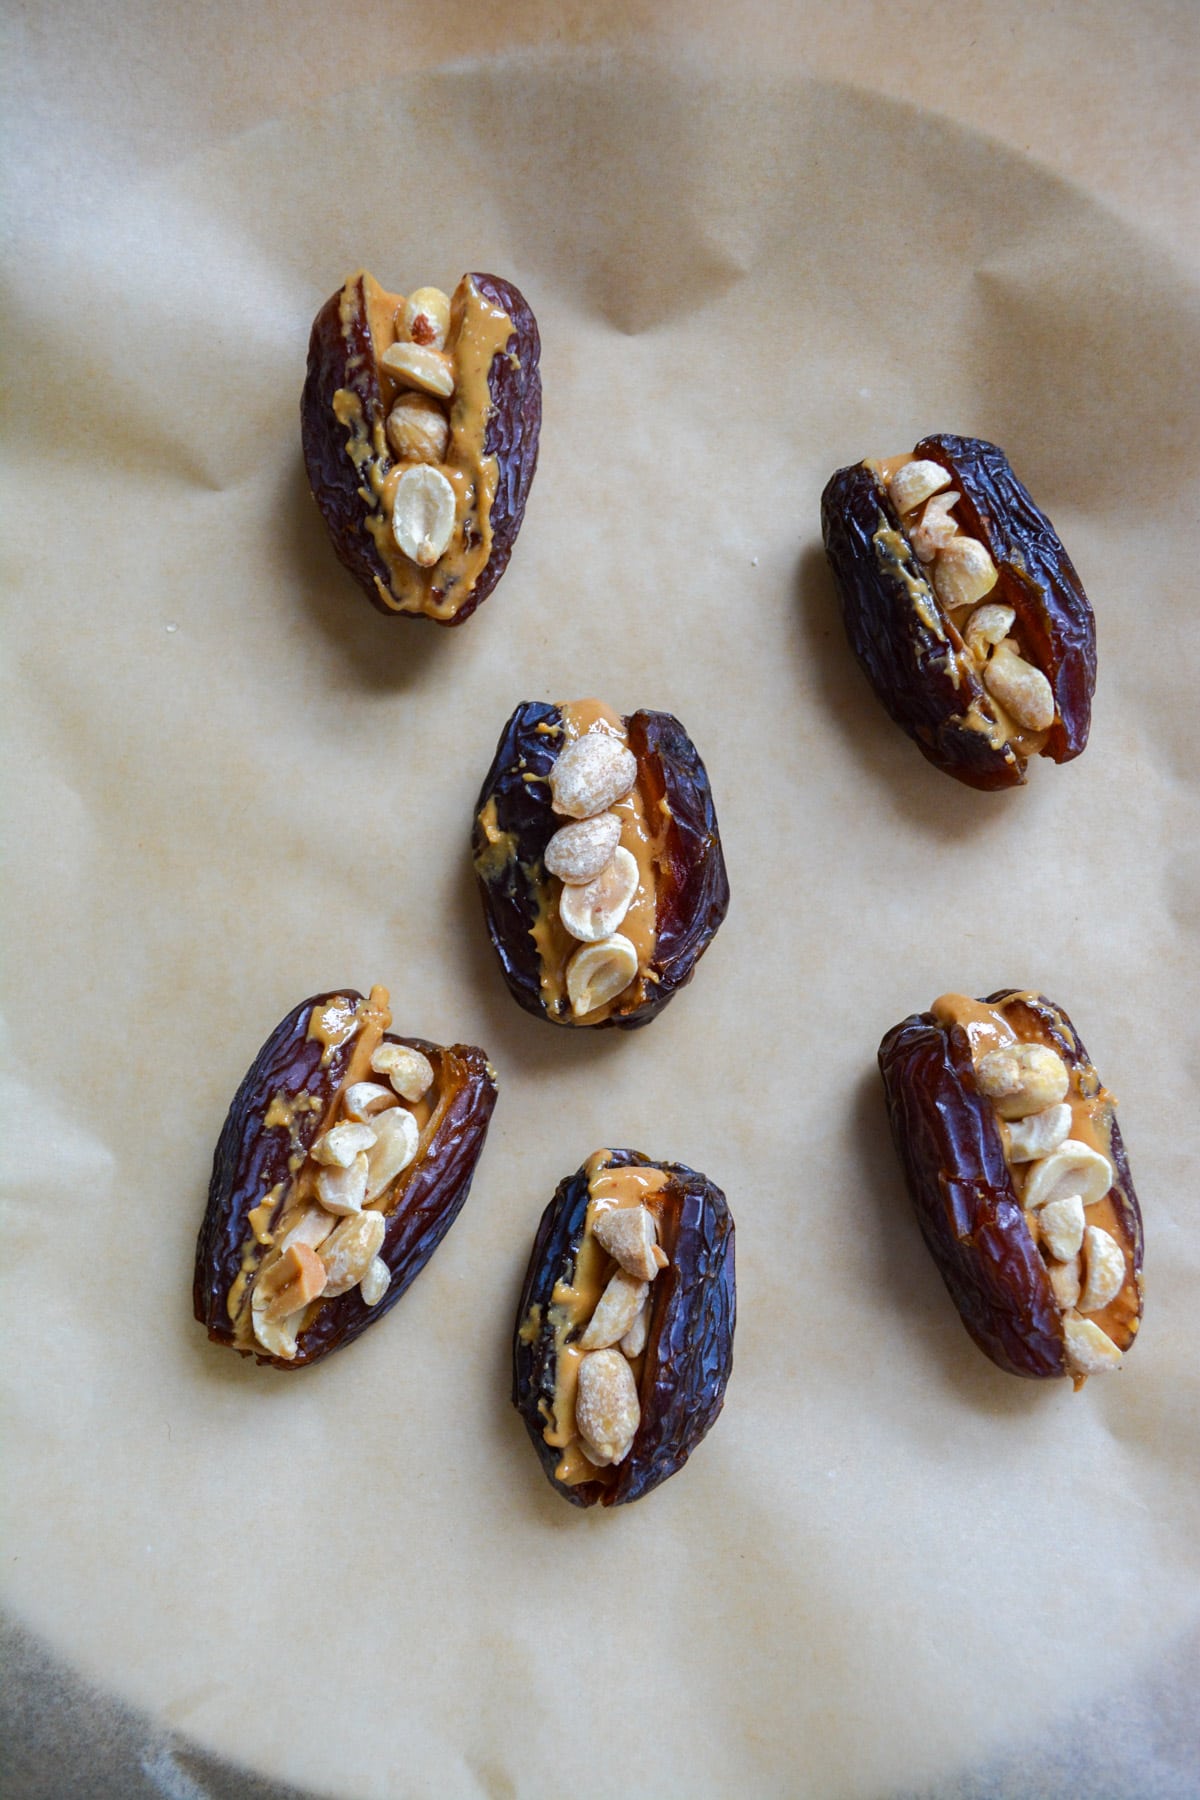 Peanut butter stuffed dates topped with peanuts on a parchment lined plate.